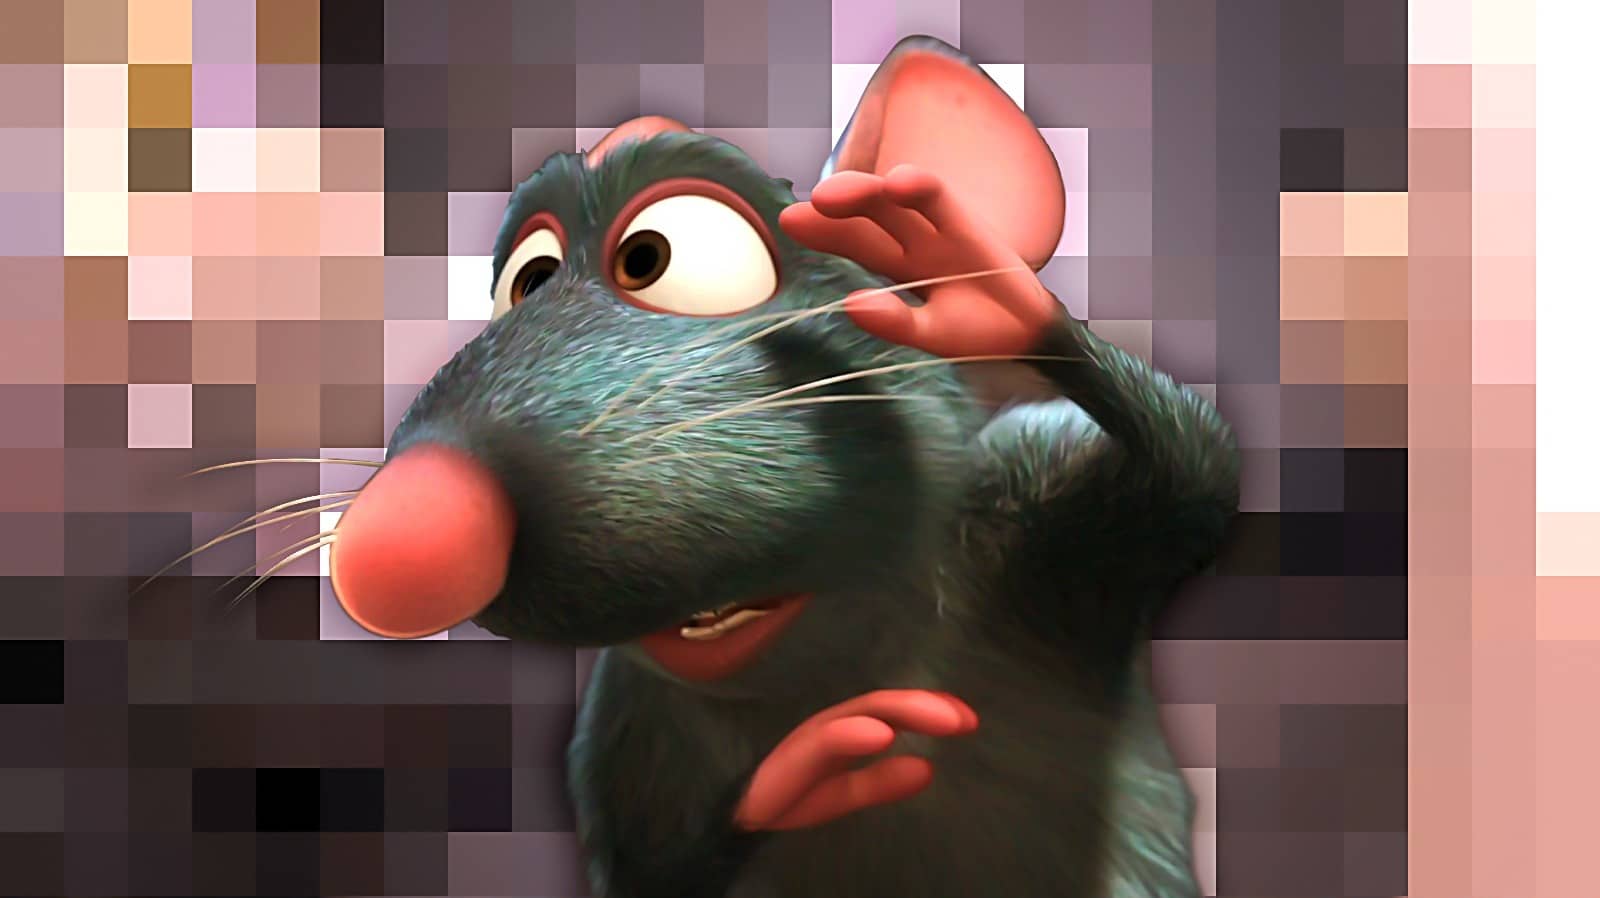 Pixar's Ratatouille Does Have A Scene With Nudity 12